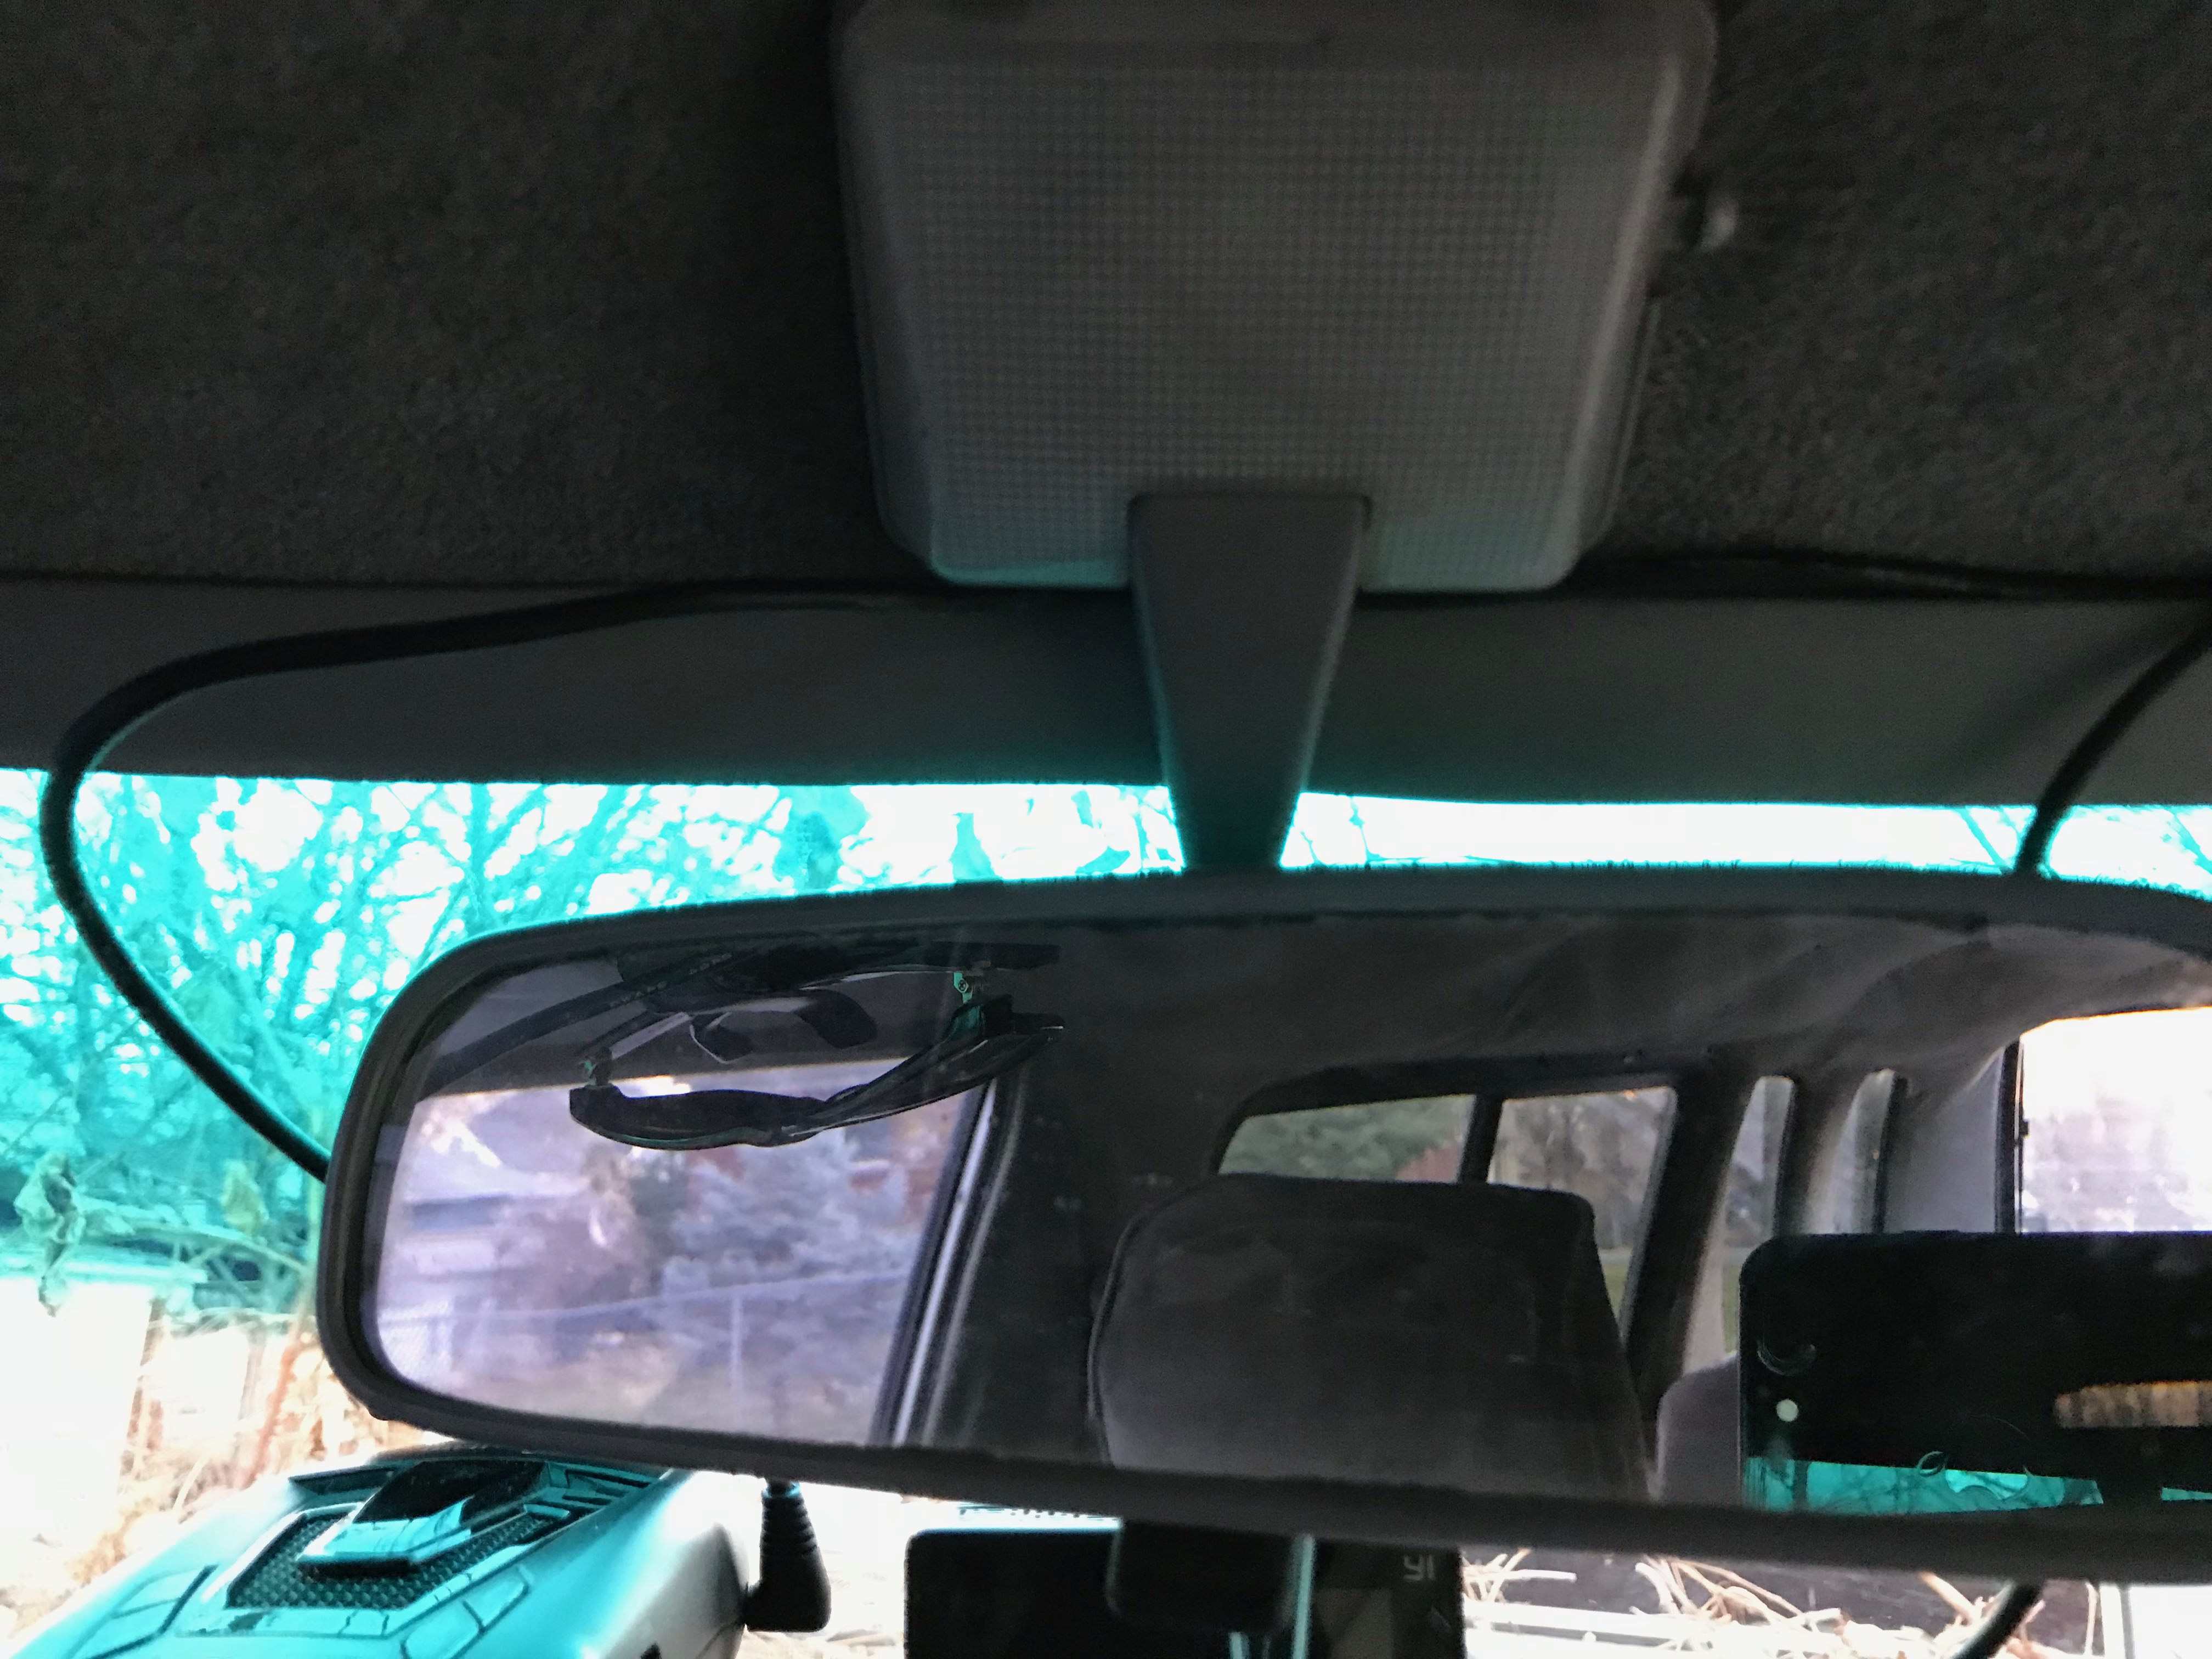 Dash cam mounted on windshield